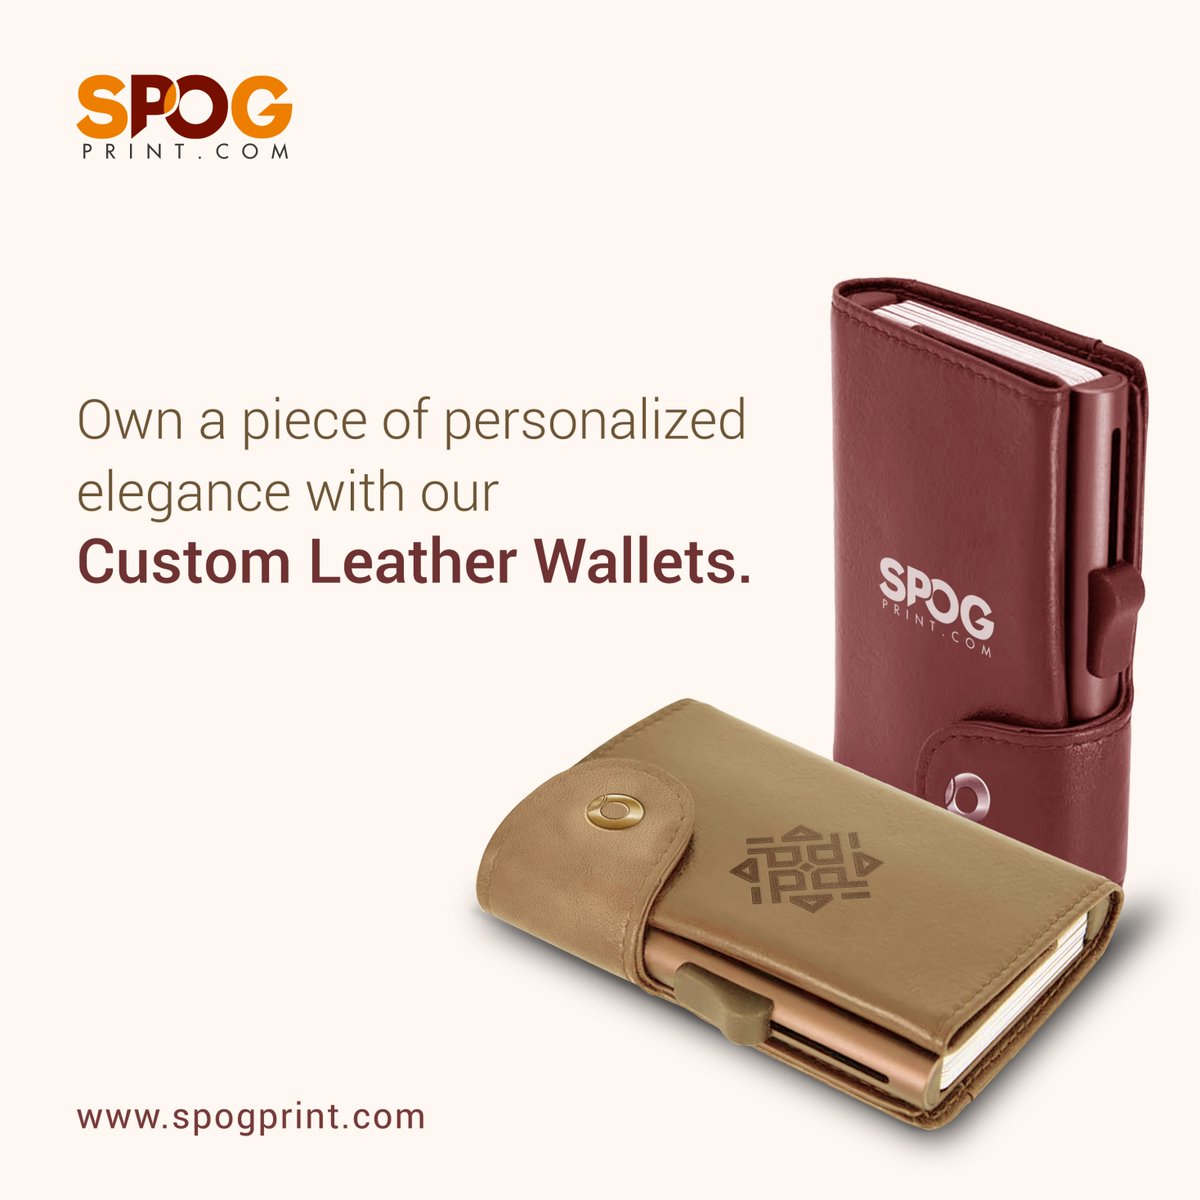 Introducing Our Exceptional Customized Leather Wallets, Crafted to Showcase Your Distinct Identity.

#wallet #wallets #uae #customized #custom #customwallets #customwallet #customwalletcase #gifts #giftideas #gifting #gift #customgift #customgifts #customgifts #spogprint